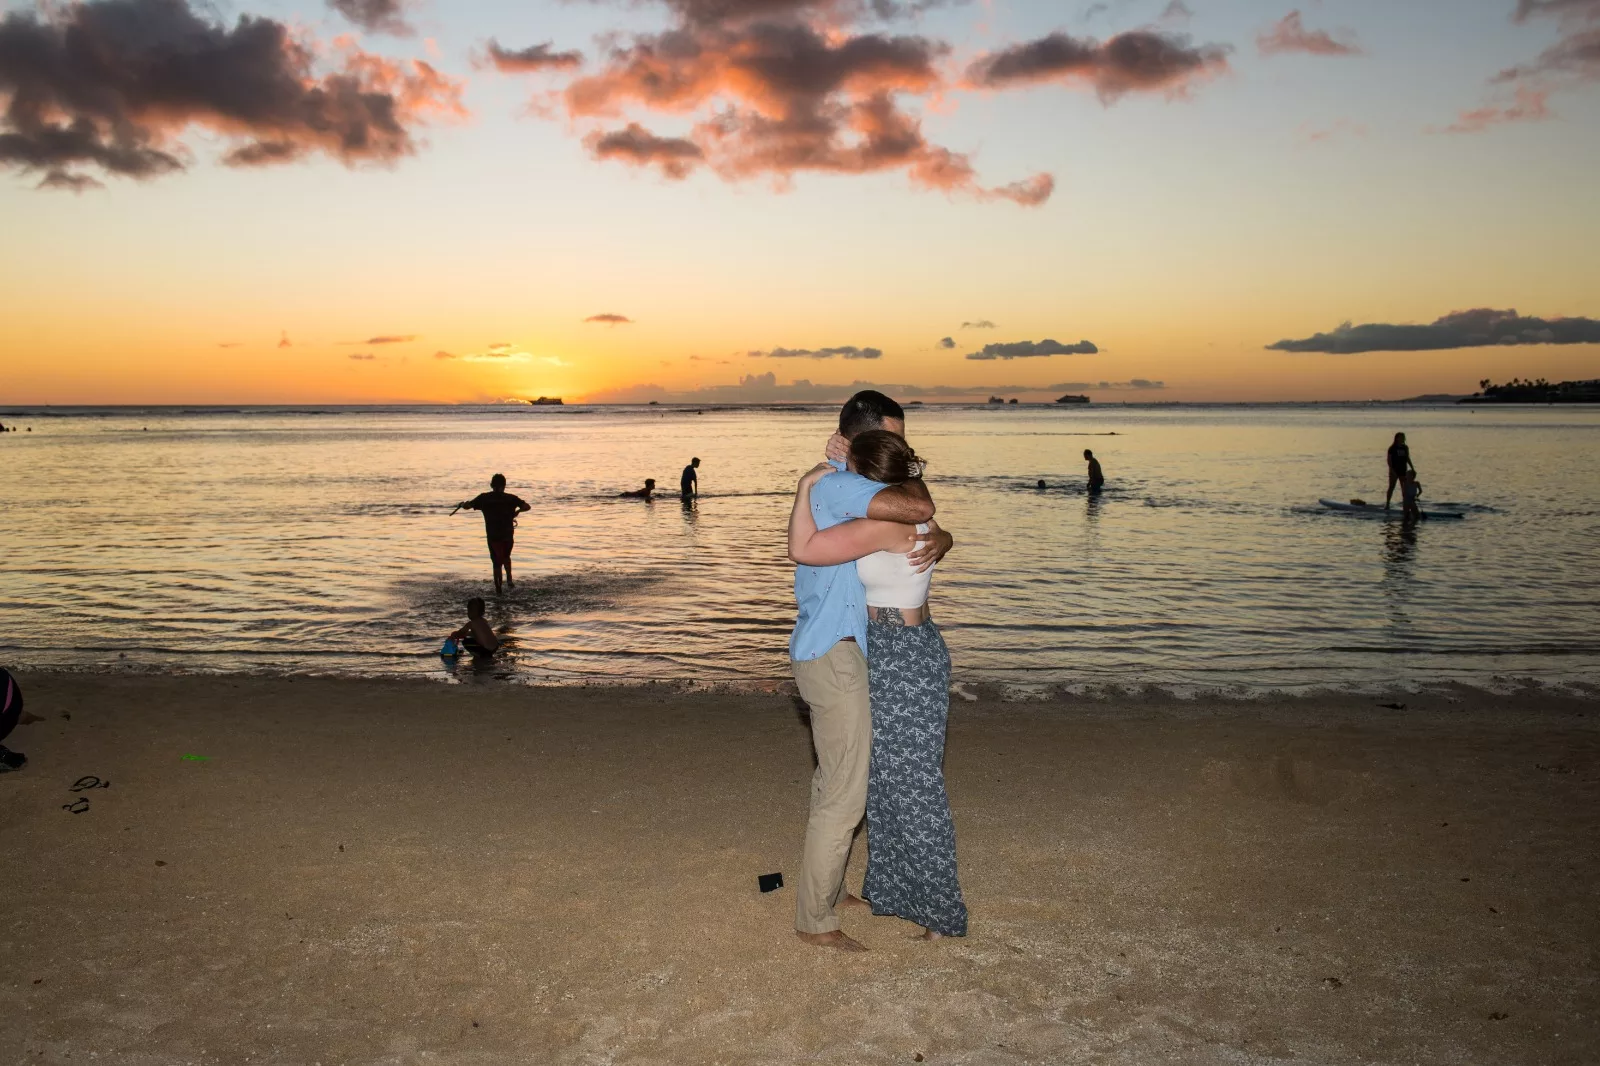 an image of a couple in the beach hugging captured by koolina photographer